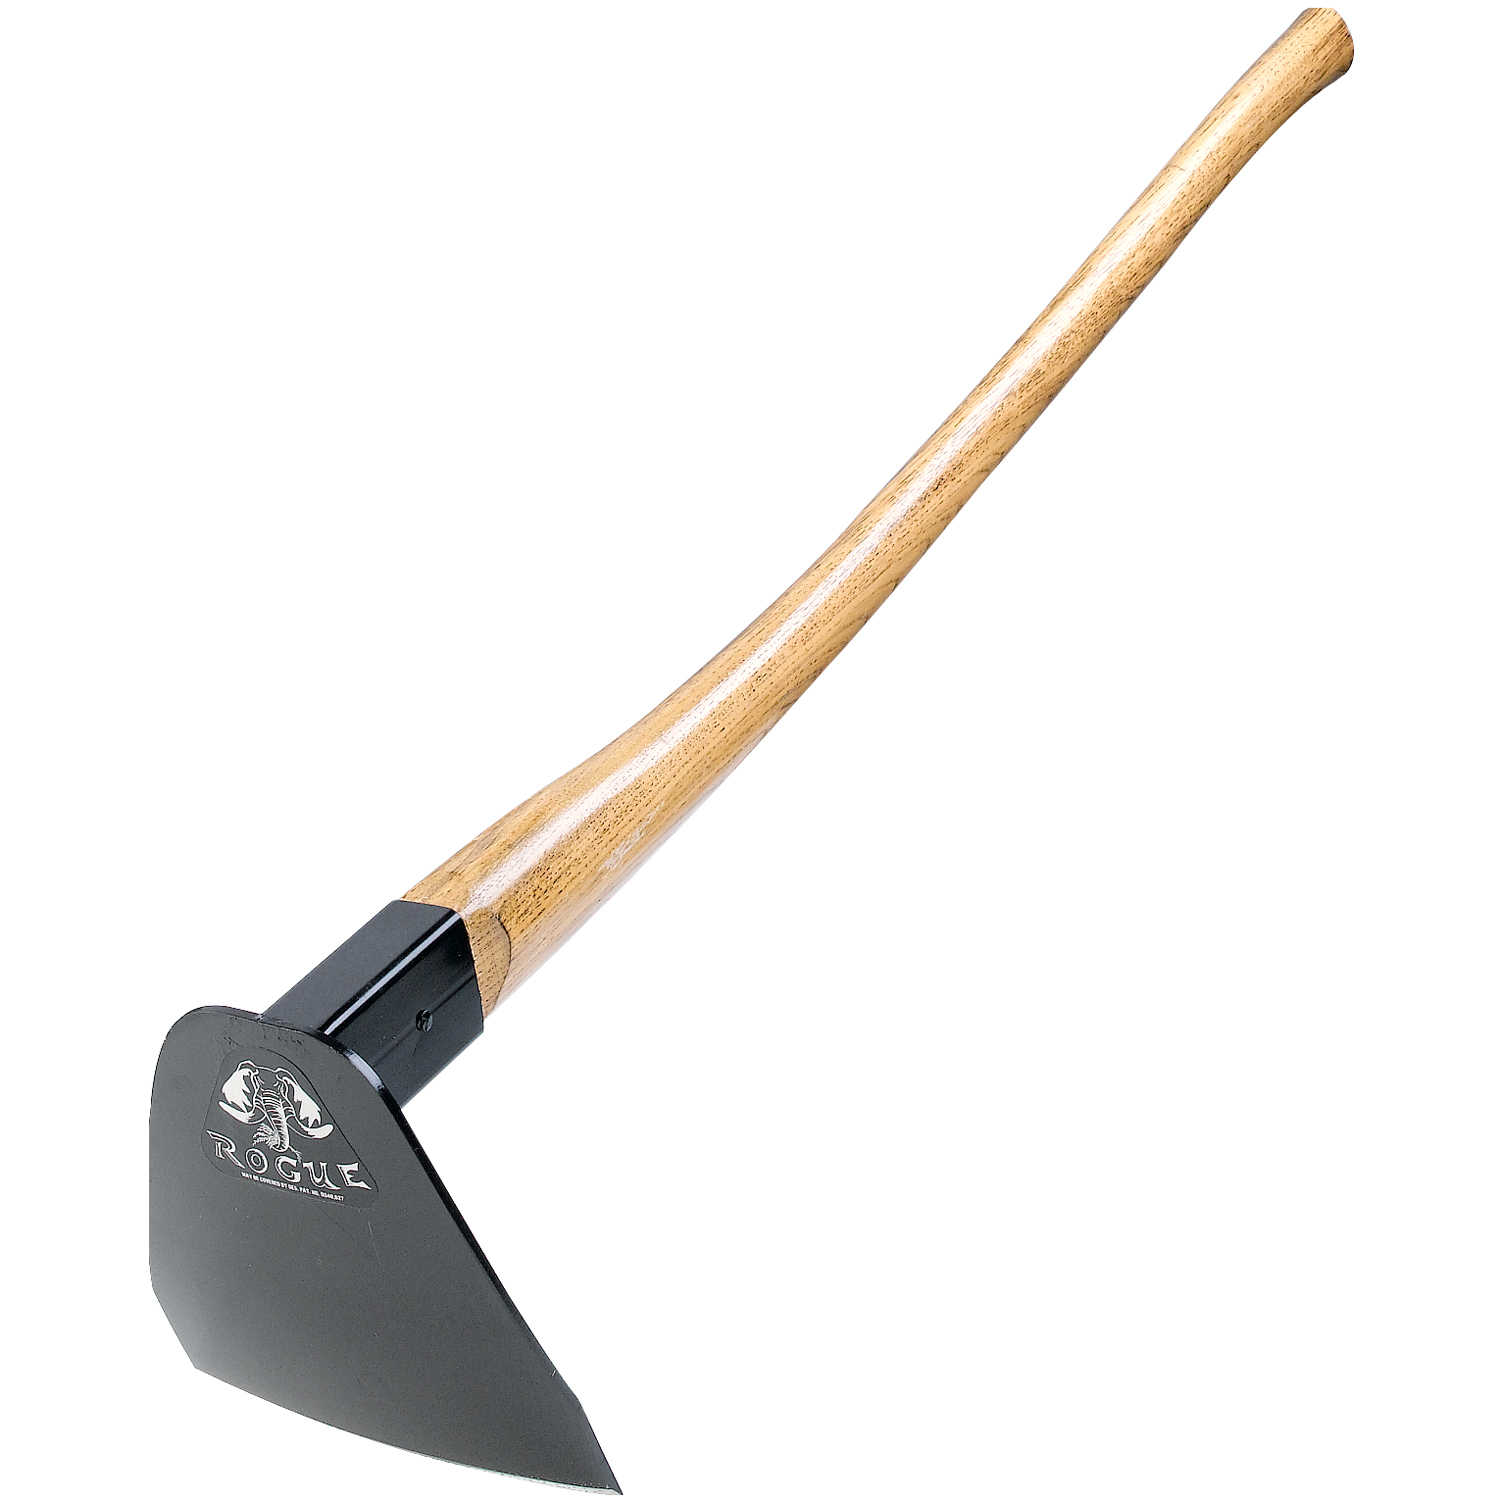 Hoes Rogue Hoe Field Hoes | Forestry Suppliers, Inc.